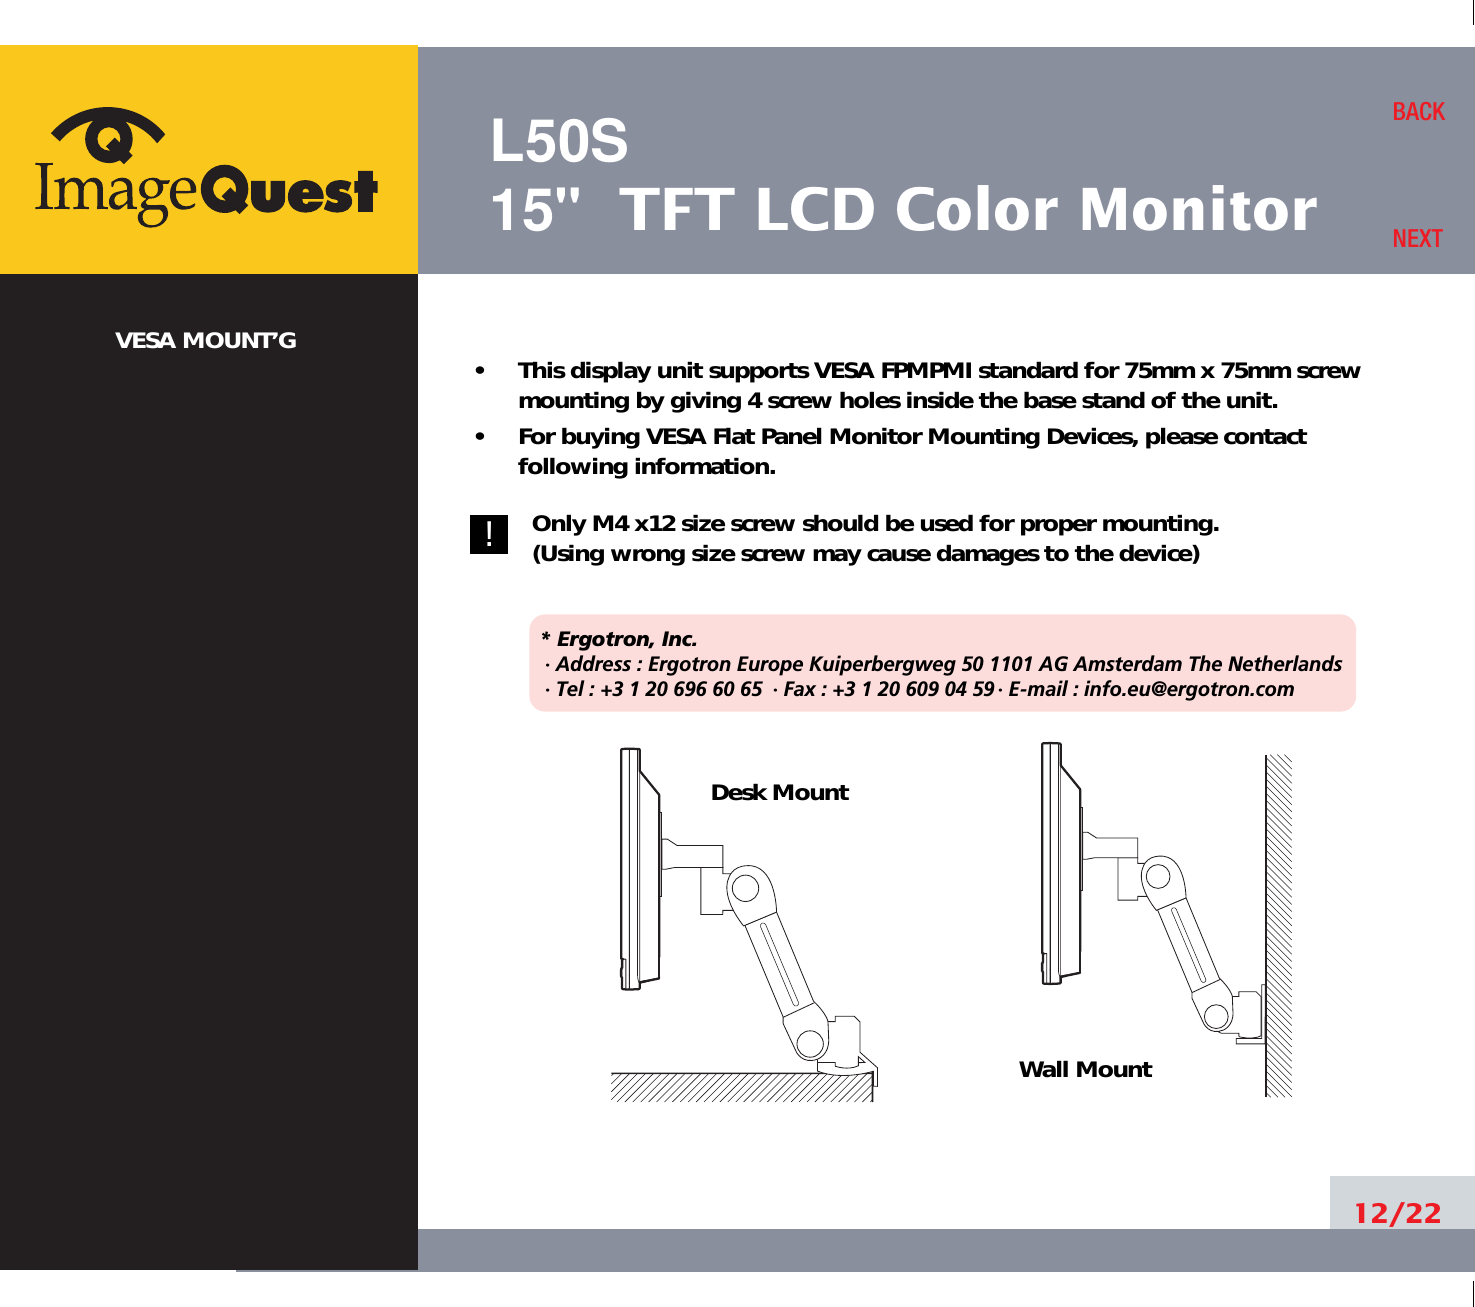 L50S15&quot; TFT LCD Color MonitorVESA MOUNT’G •     This display unit supports VESA FPMPMI standard for 75mm x 75mm screwmounting by giving 4 screw holes inside the base stand of the unit.•     For buying VESA Flat Panel Monitor Mounting Devices, please contactfollowing information.Only M4 x12 size screw should be used for proper mounting.(Using wrong size screw may cause damages to the device)* Ergotron, Inc.· Address : Ergotron Europe Kuiperbergweg 50 1101 AG Amsterdam The Netherlands· Tel : +3 1 20 696 60 65 · Fax : +3 1 20 609 04 59 · E-mail : info.eu@ergotron.com12/22BACKNEXTDesk MountWall Mount!